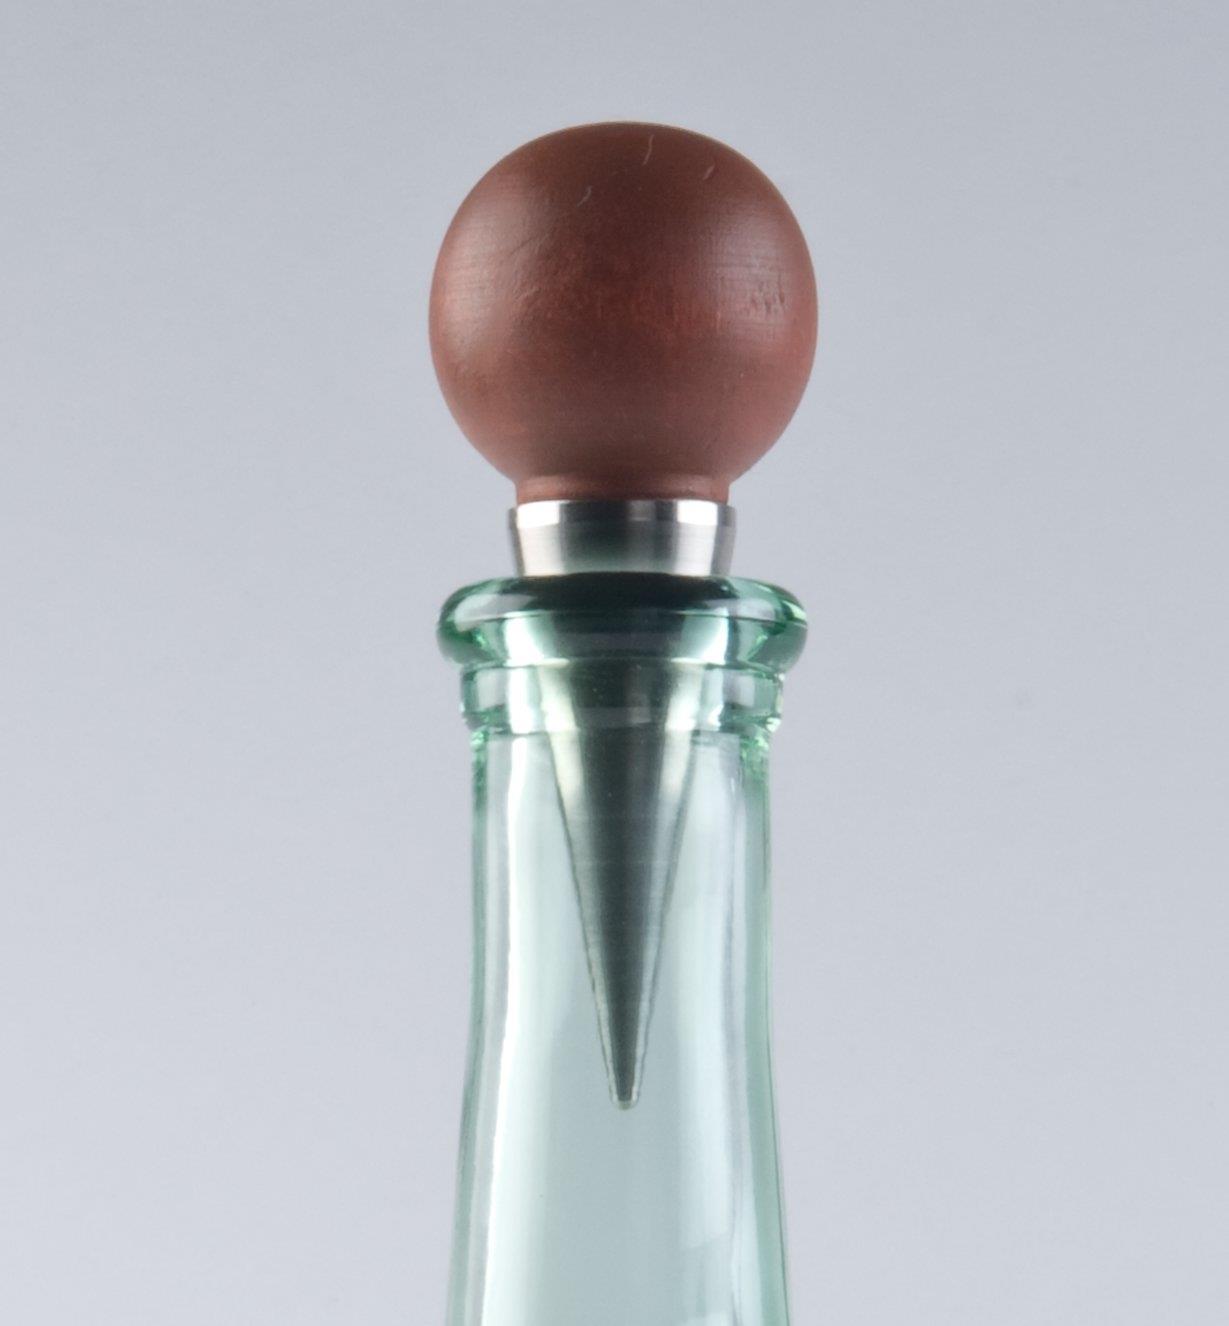 Completed stopper with wooden turning in the mouth of a wine bottle